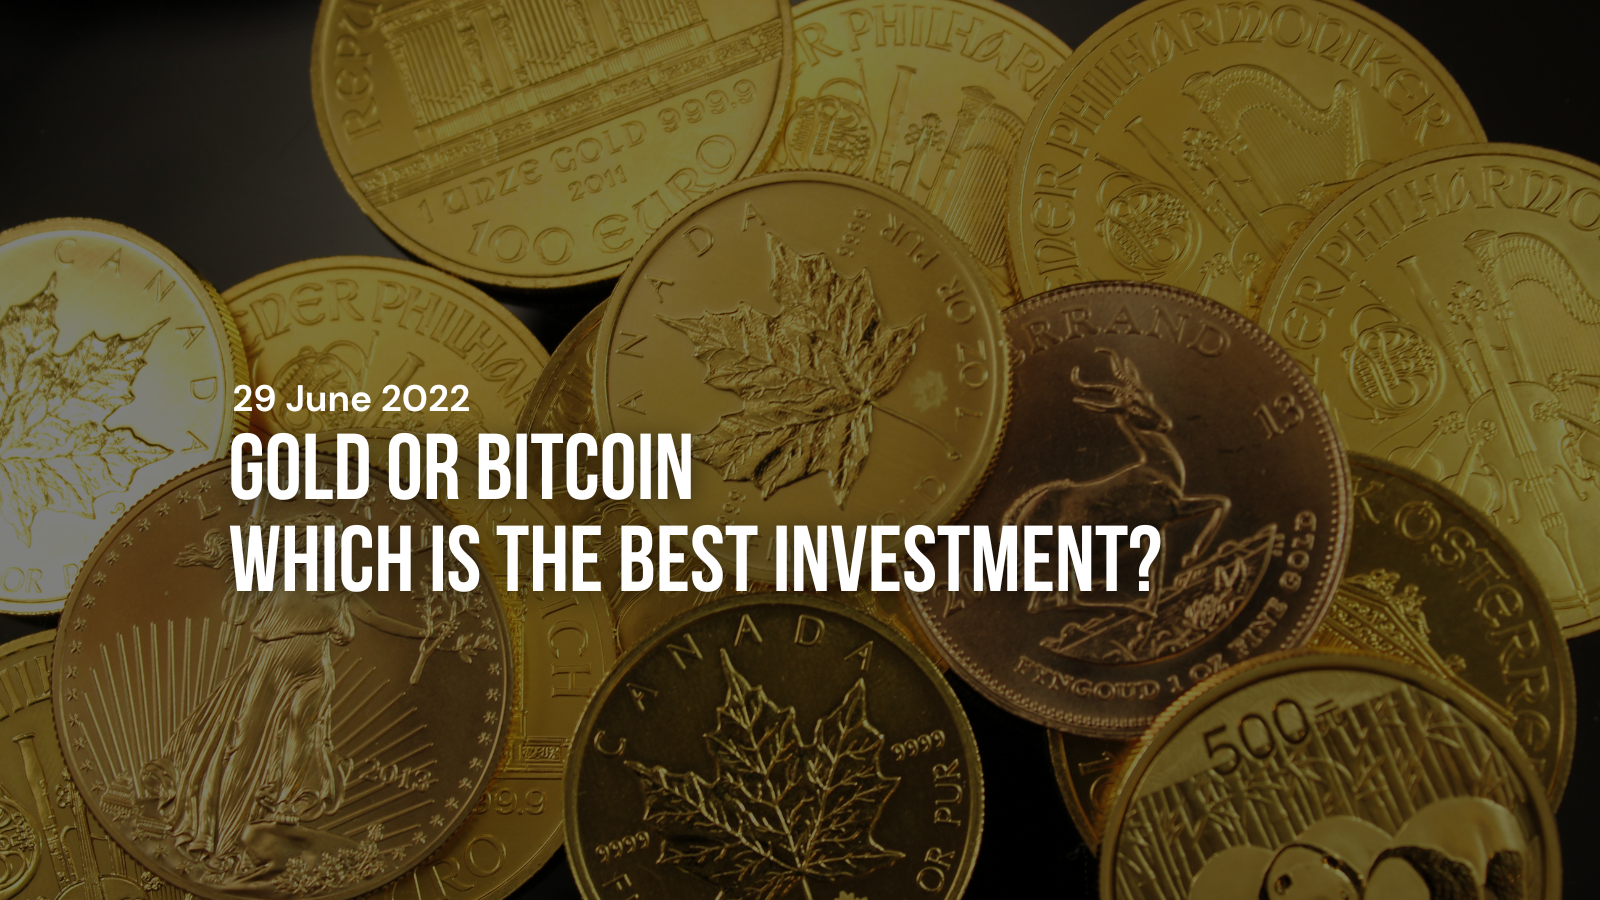 Gold or bitcoin - which one is the better investment?